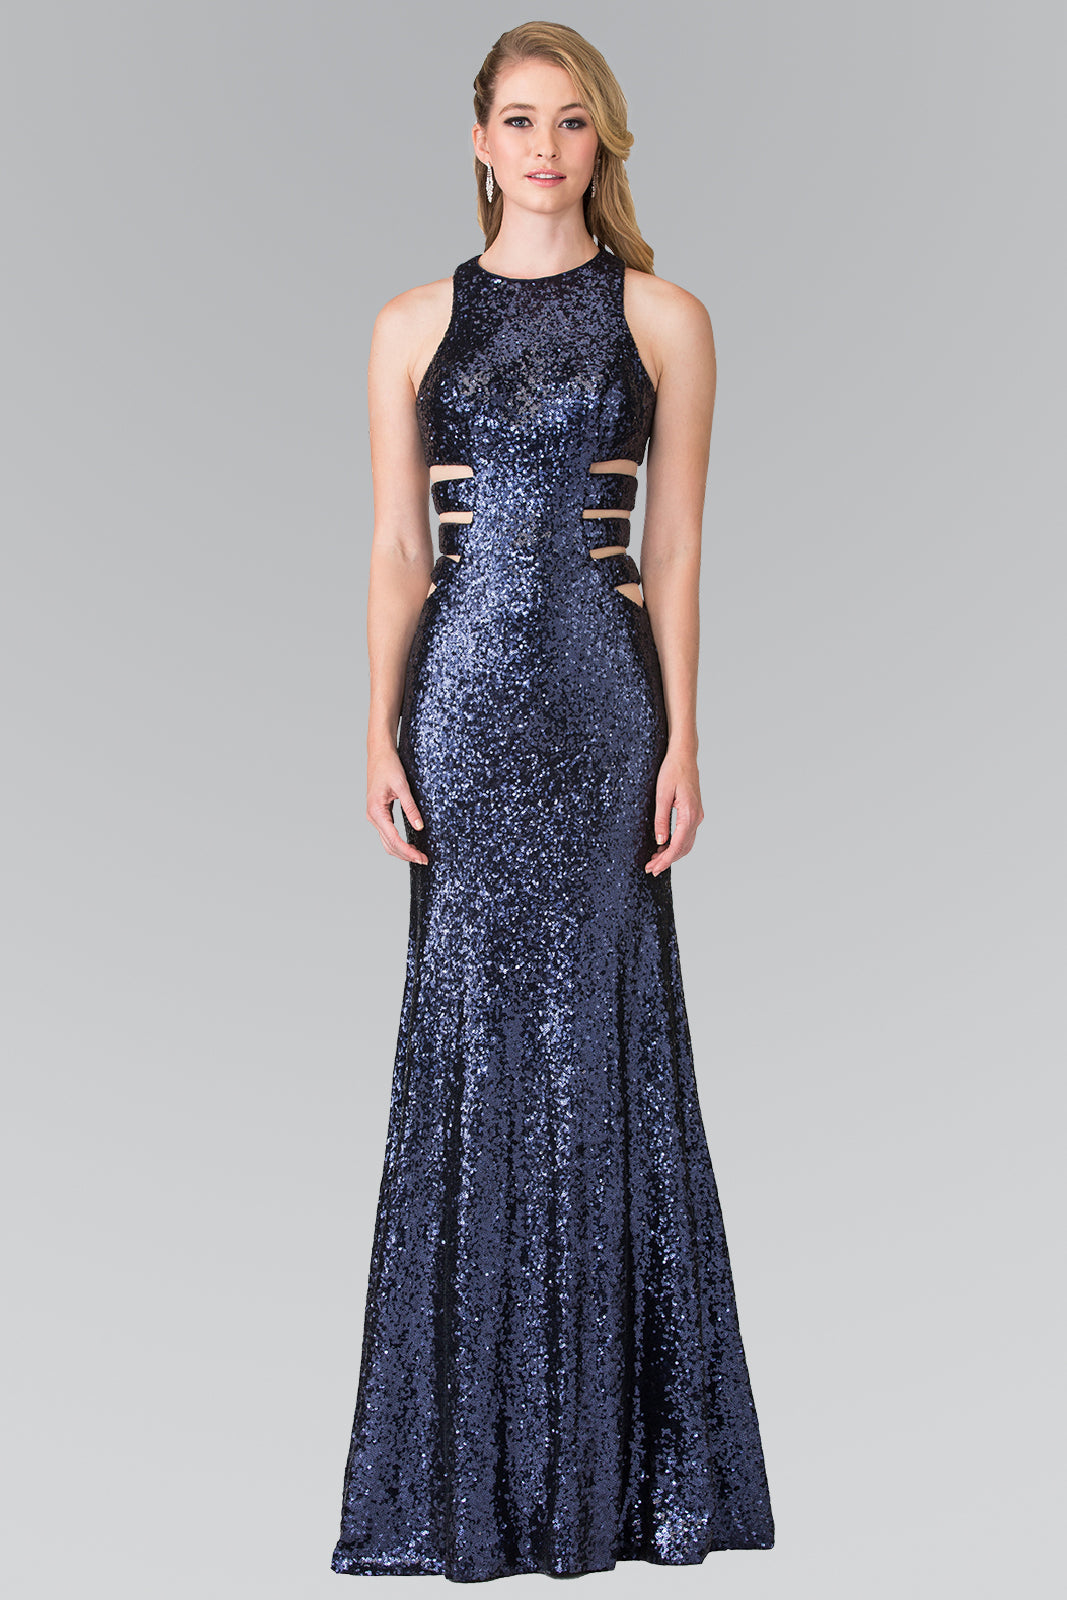 Sleeveless Sequin Long Dress with Side Cut-Out GLGL2299 Elsy Style PROM